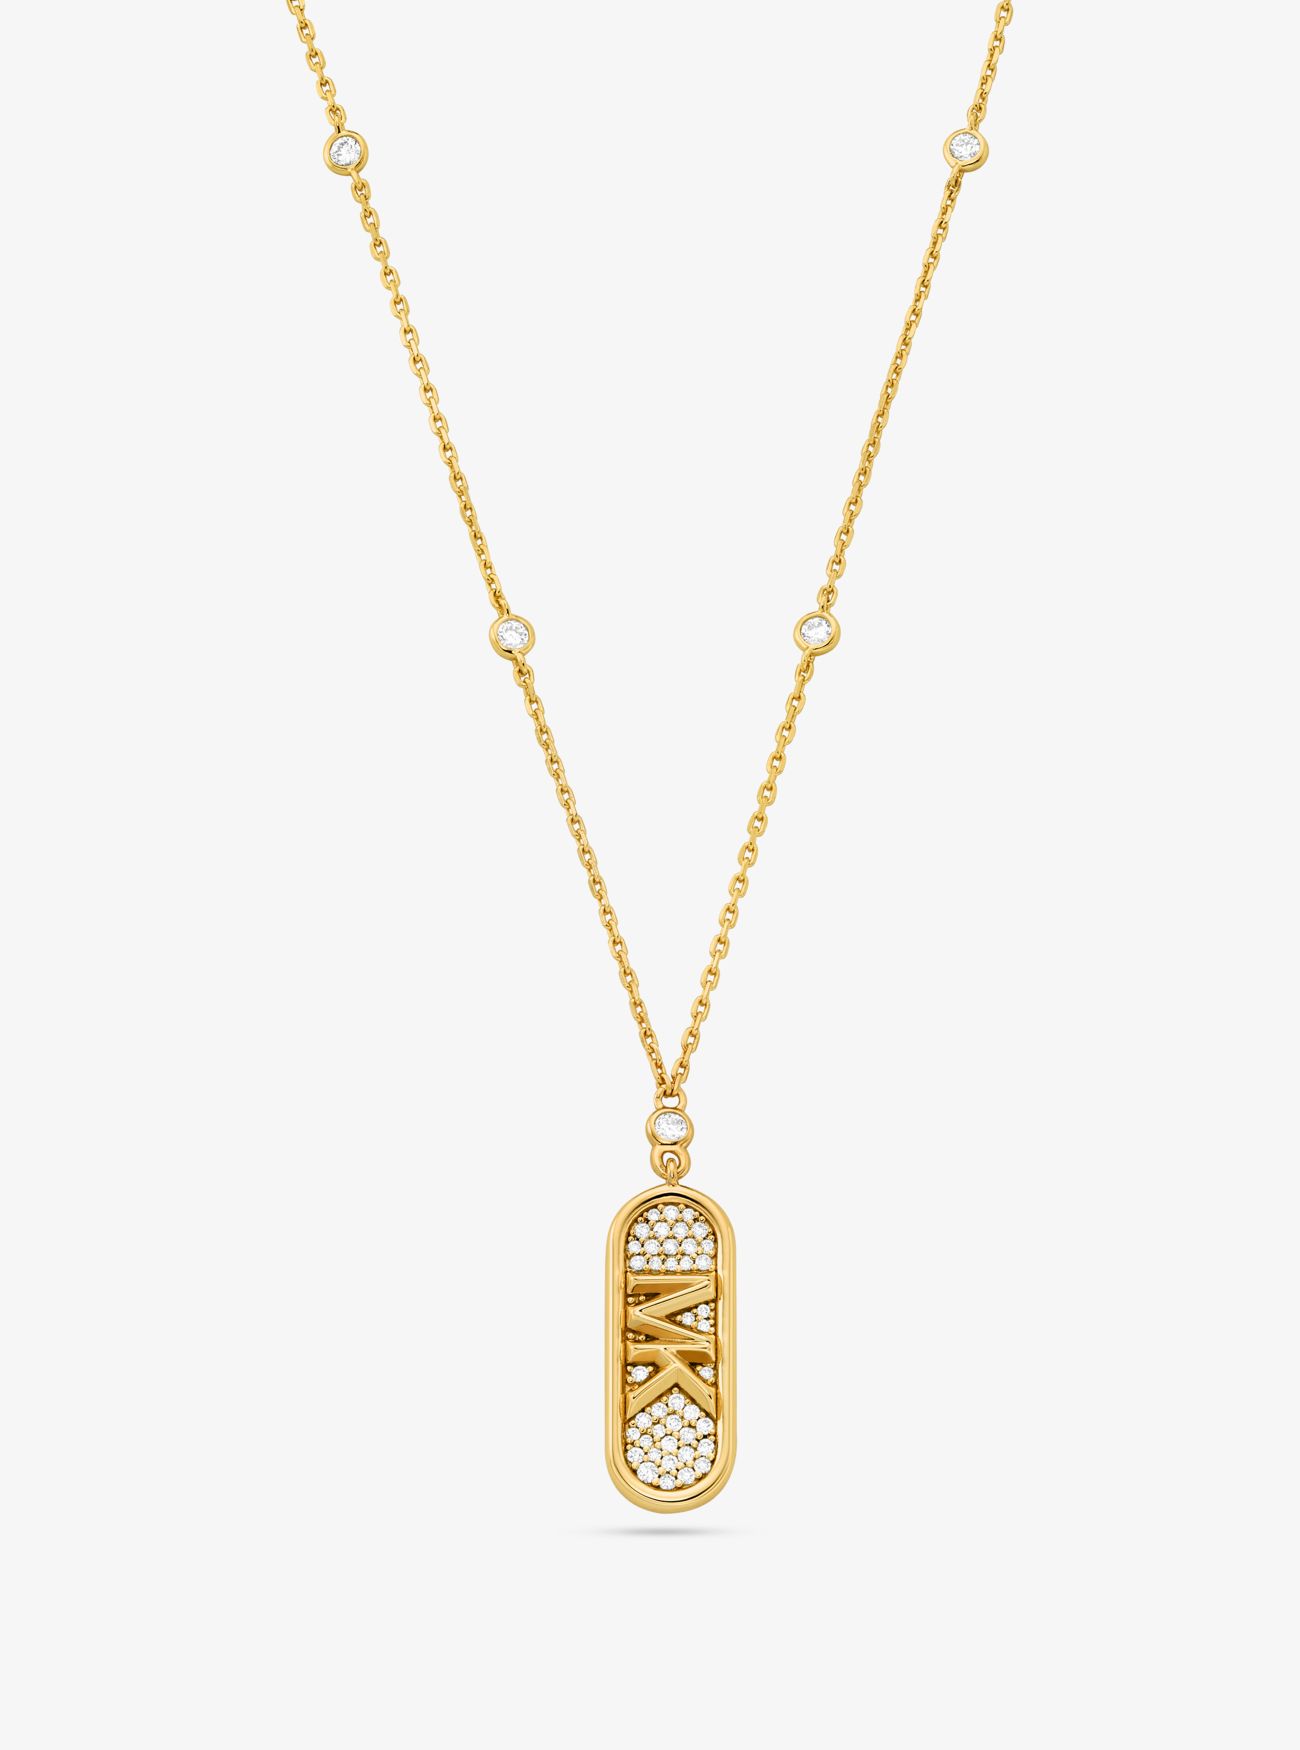 MK PavÃ© Precious Metal-Plated and Sterling Silver Empire Logo Necklace - Gold - Michael Kors